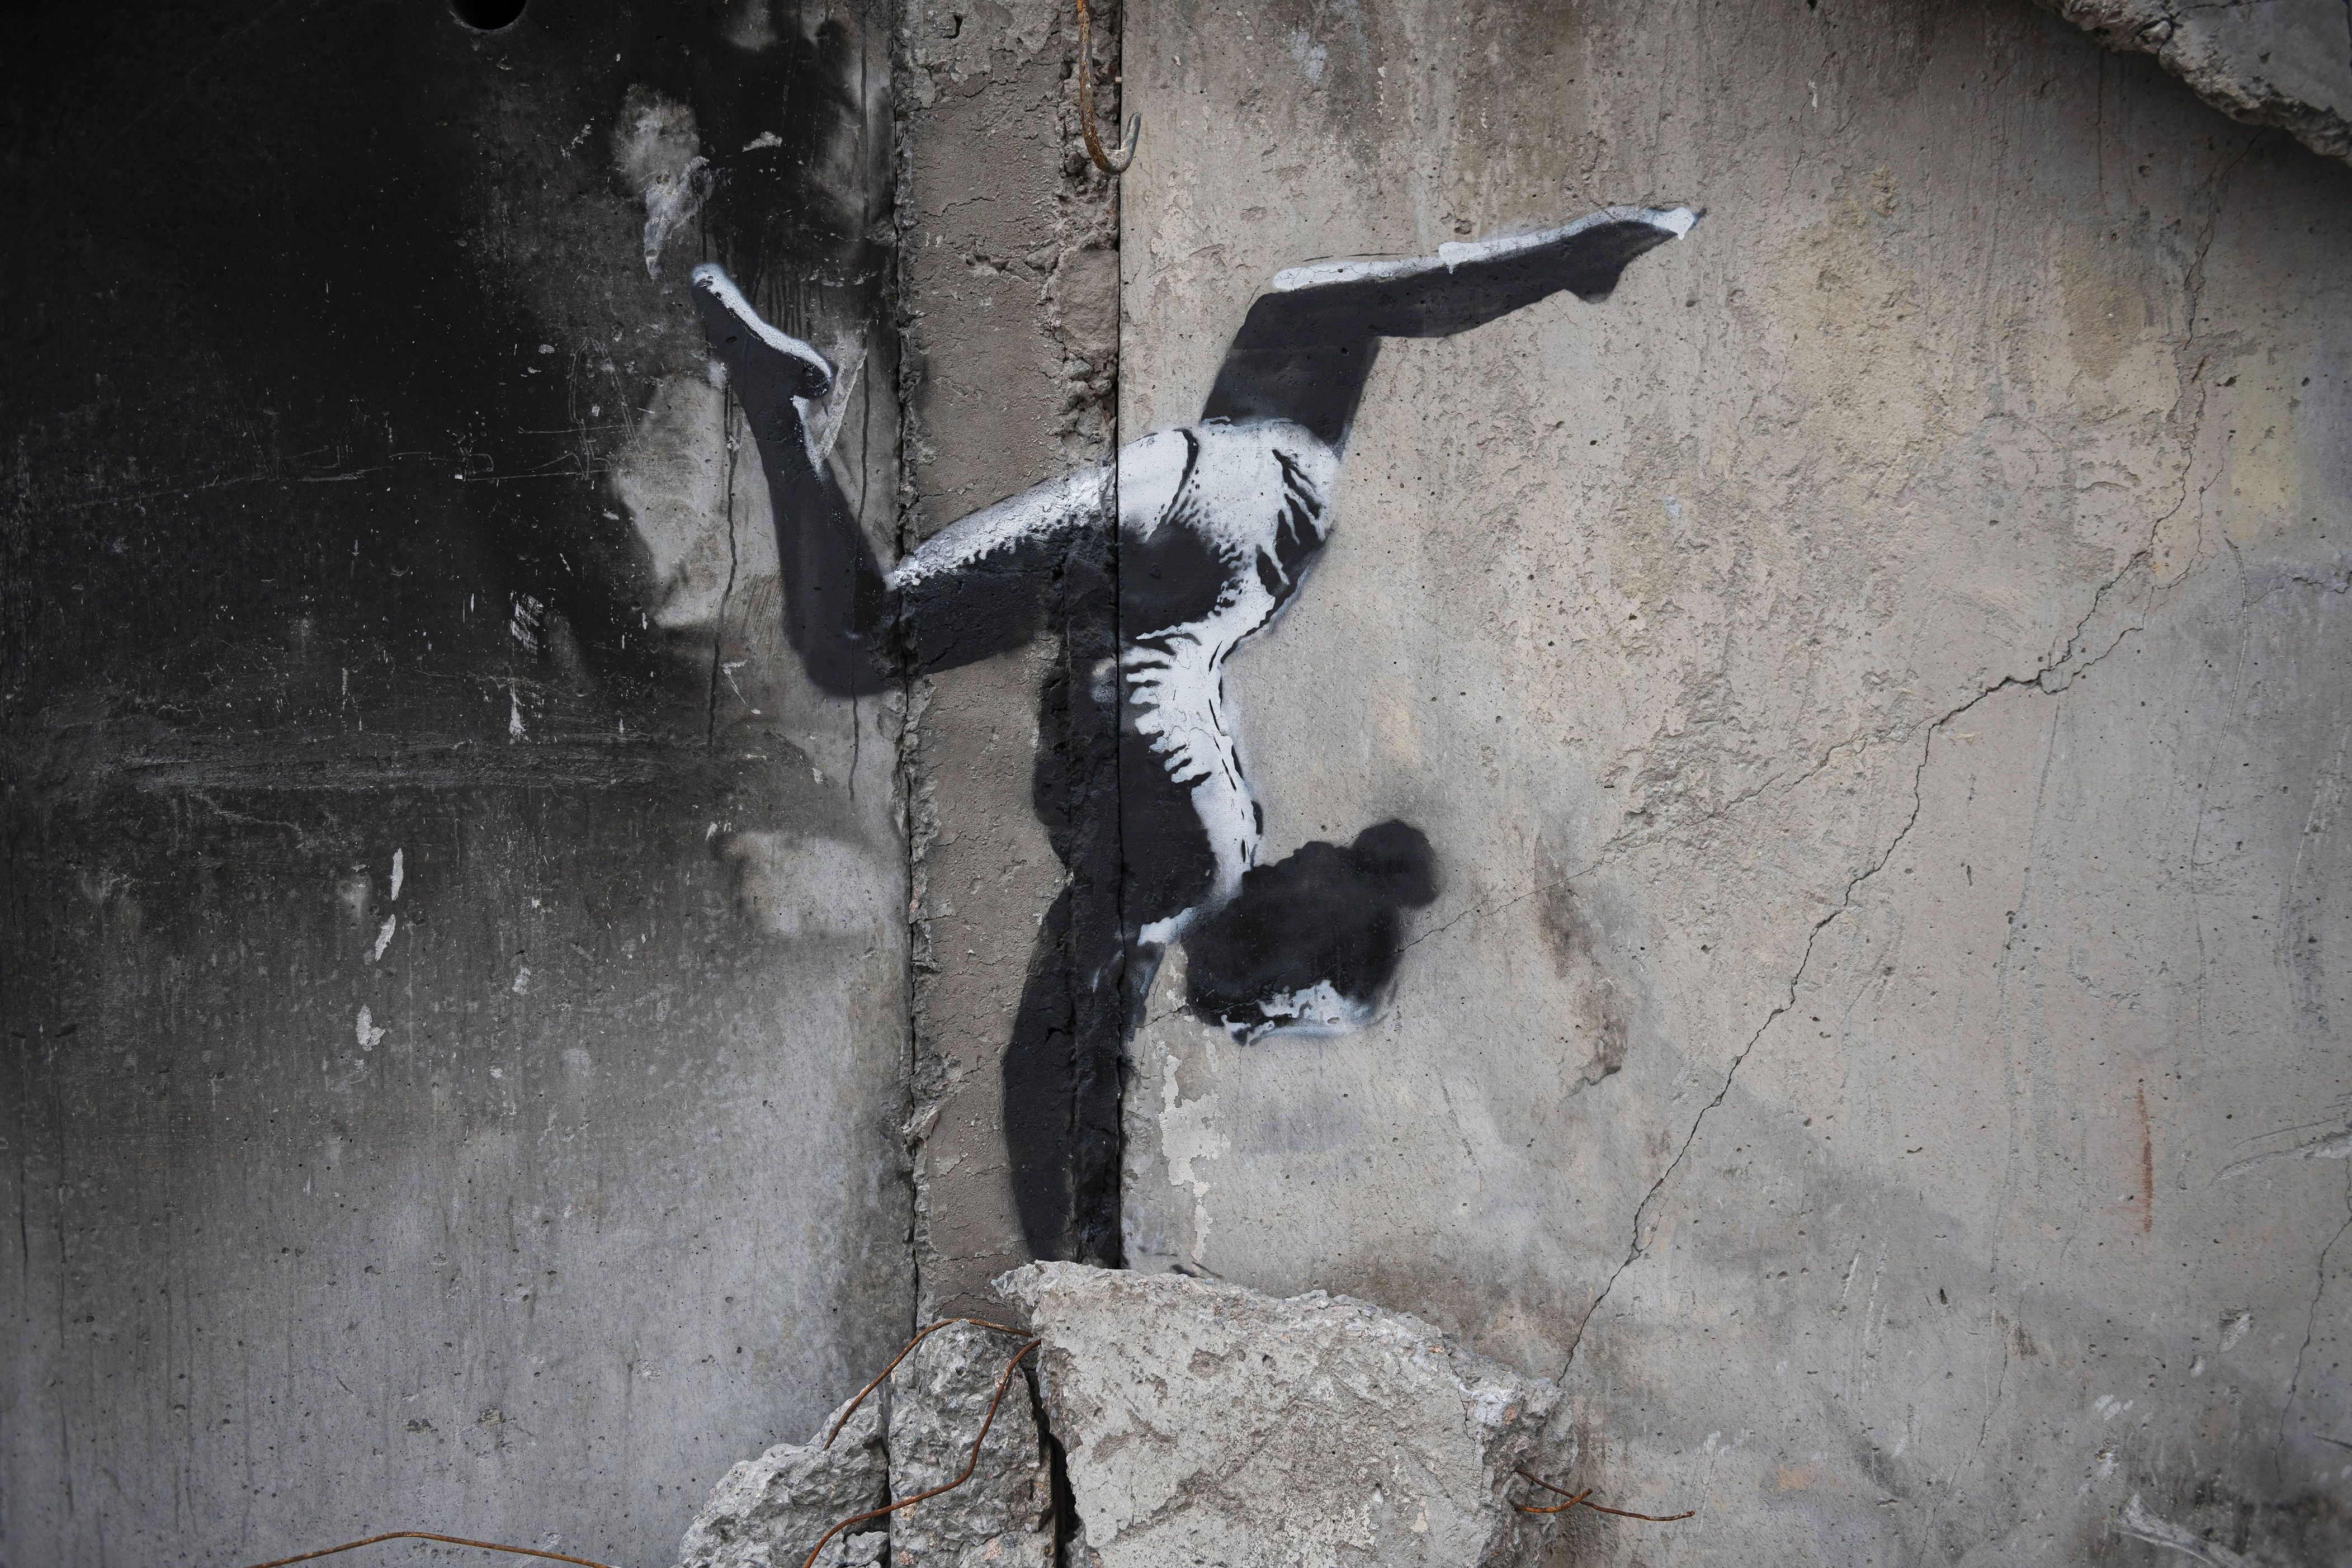 uncovered banksy interview sheds light on name and early career